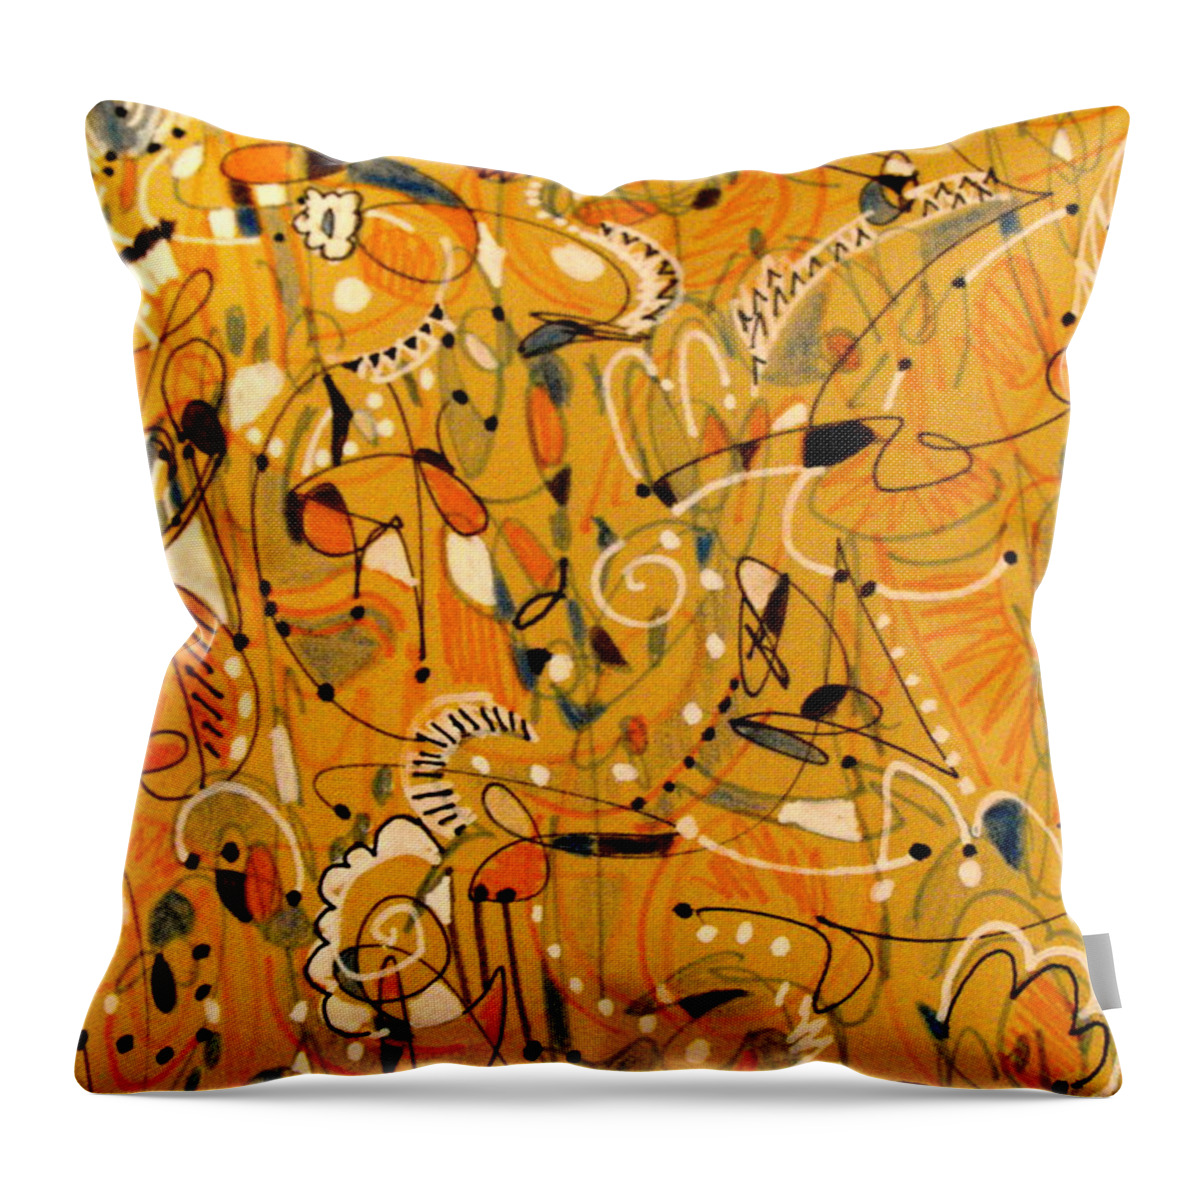 Abstract Geometrical Painting Throw Pillow featuring the painting Signs Written in Big Print by Nancy Kane Chapman